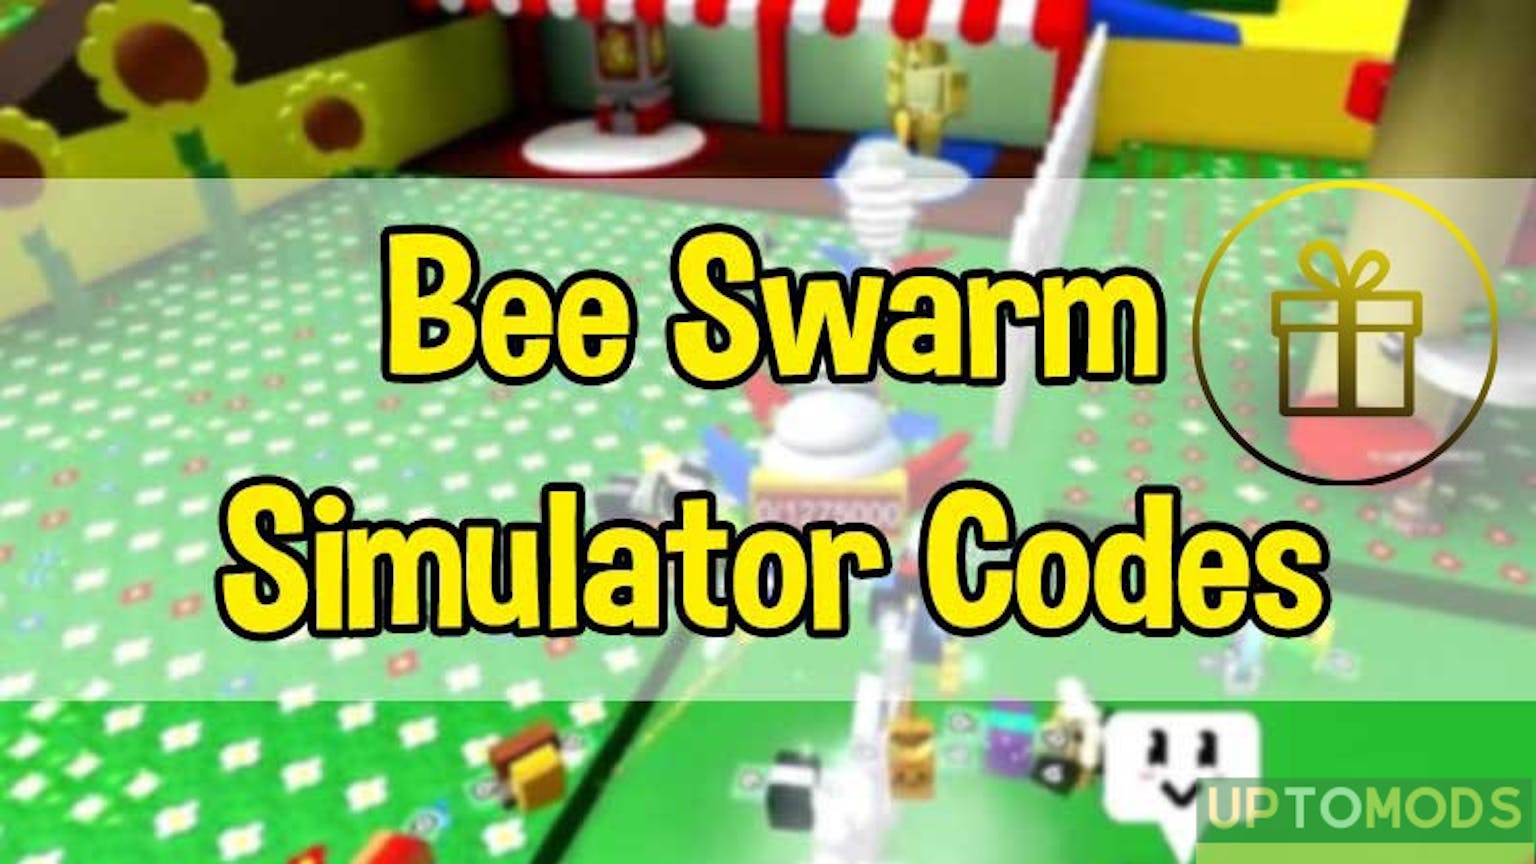 How To Get A New Code In The Game Bee Swarm Simulator - UpToMods - Free Mod  Apk Games And Apps